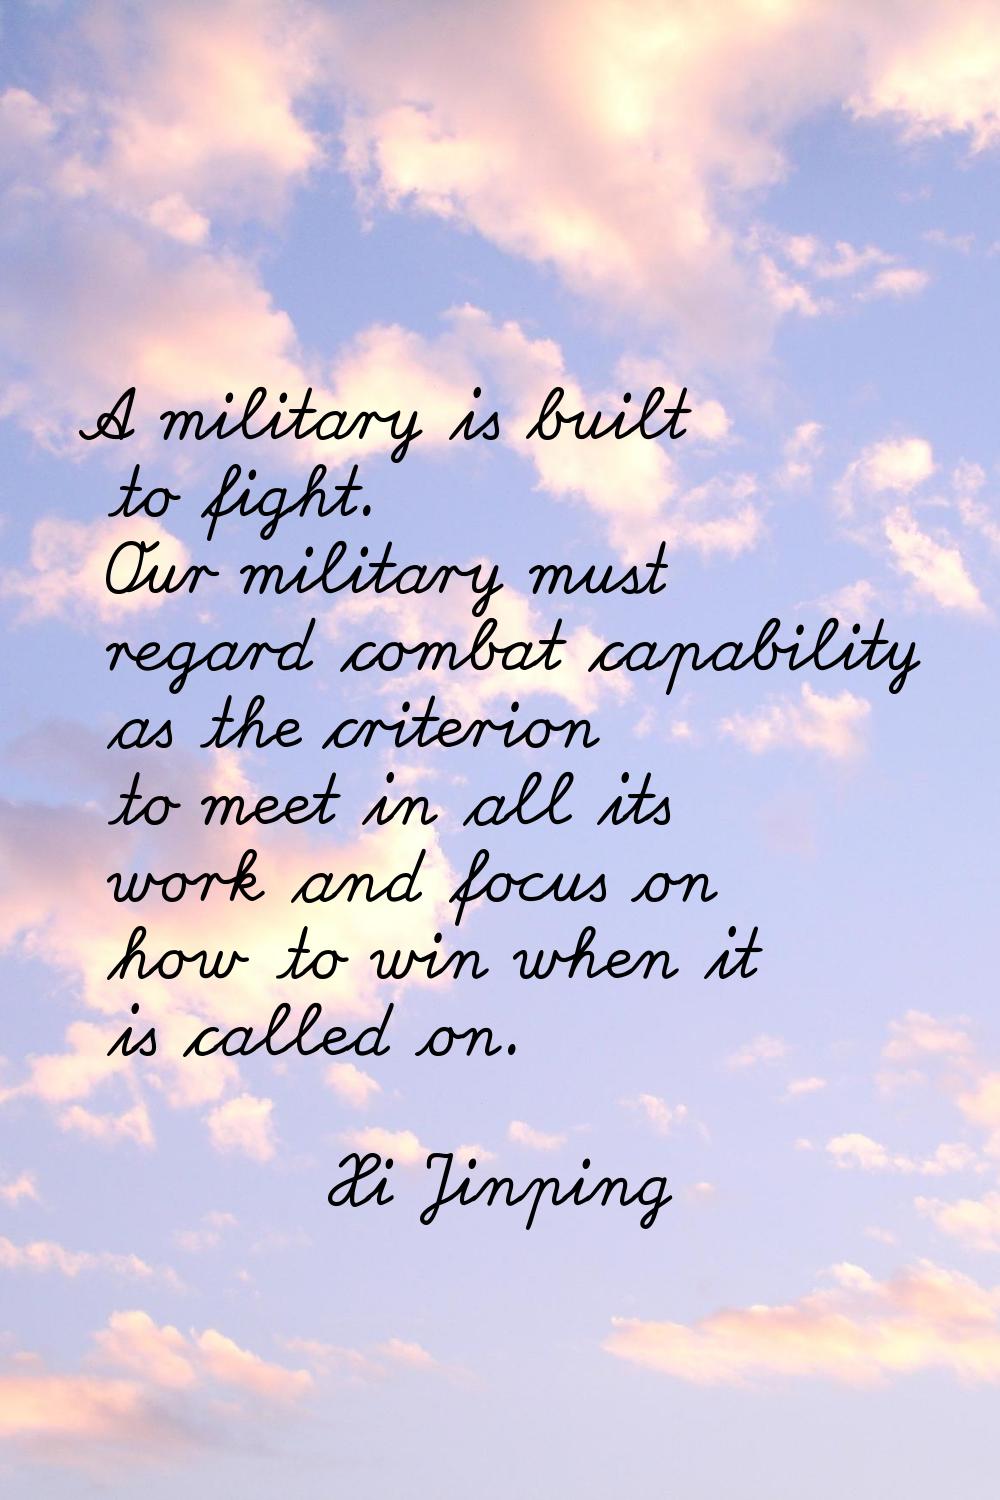 A military is built to fight. Our military must regard combat capability as the criterion to meet i